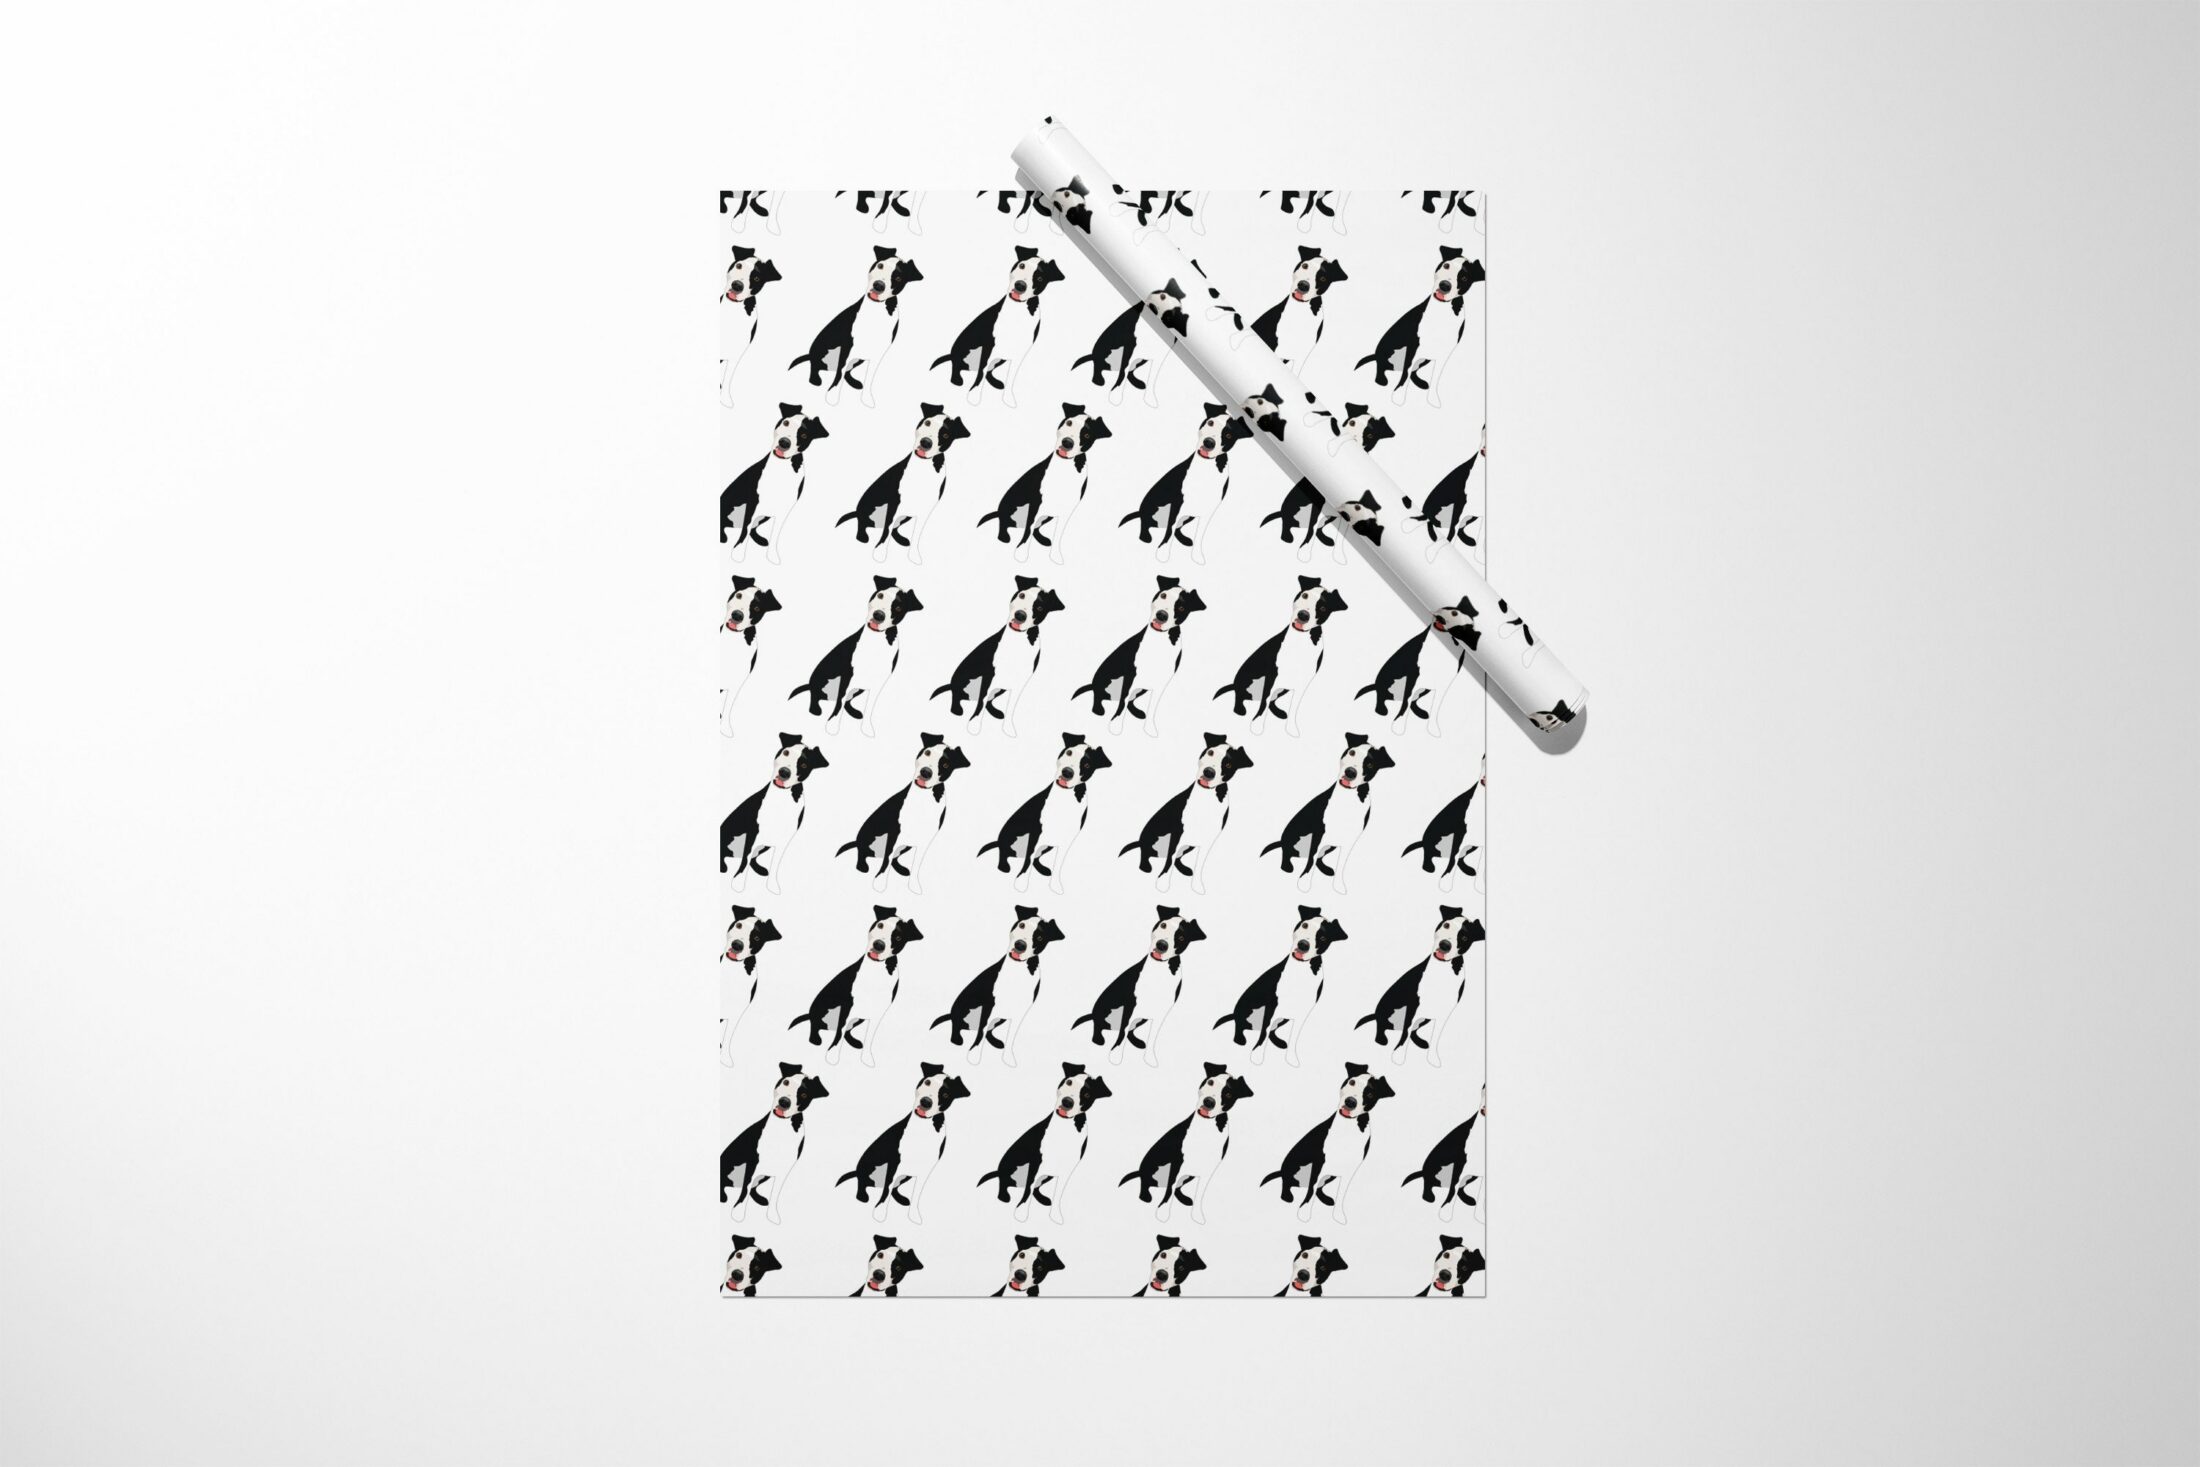 Pitbull Terrier Wrapping Paper with giraffes on it.